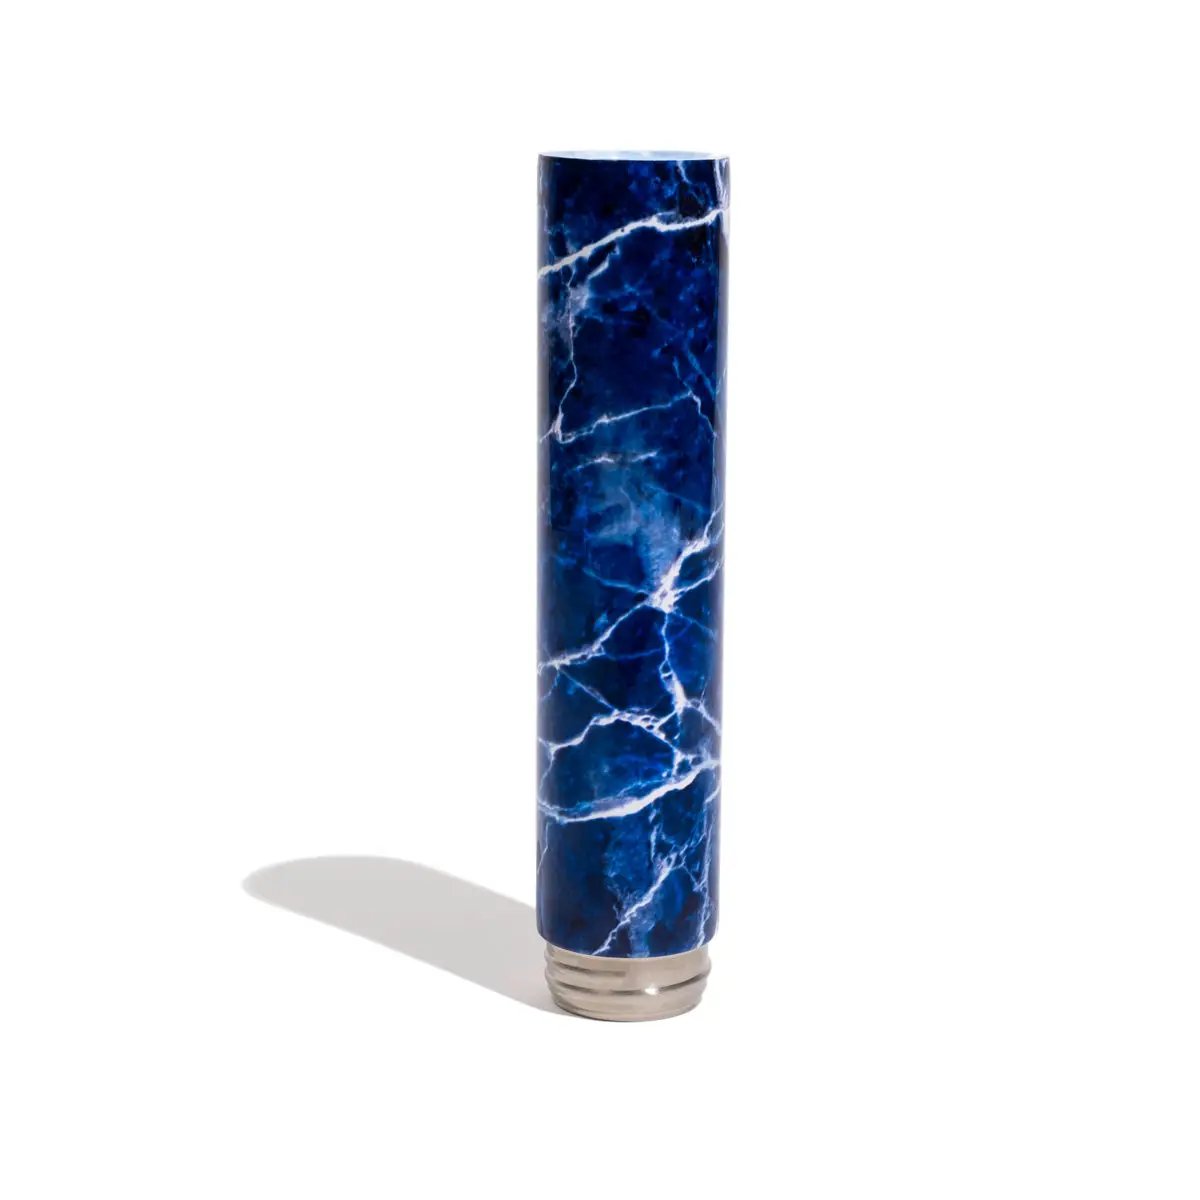 Gloss Blue & Blue Marble Combo by Chill Steel Pipes